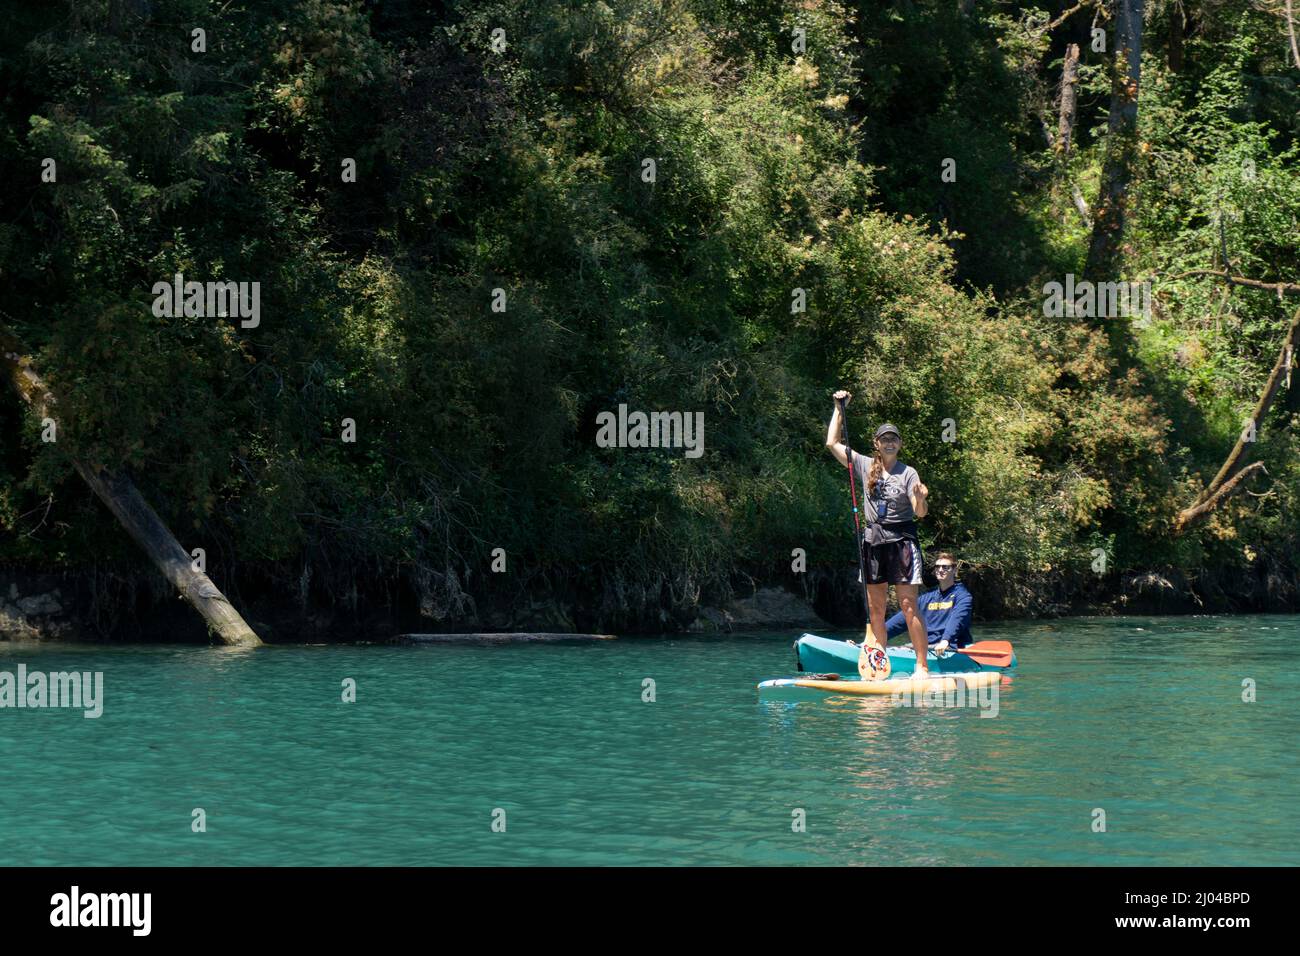 Paddling on the Albion river, California. Stock Photo